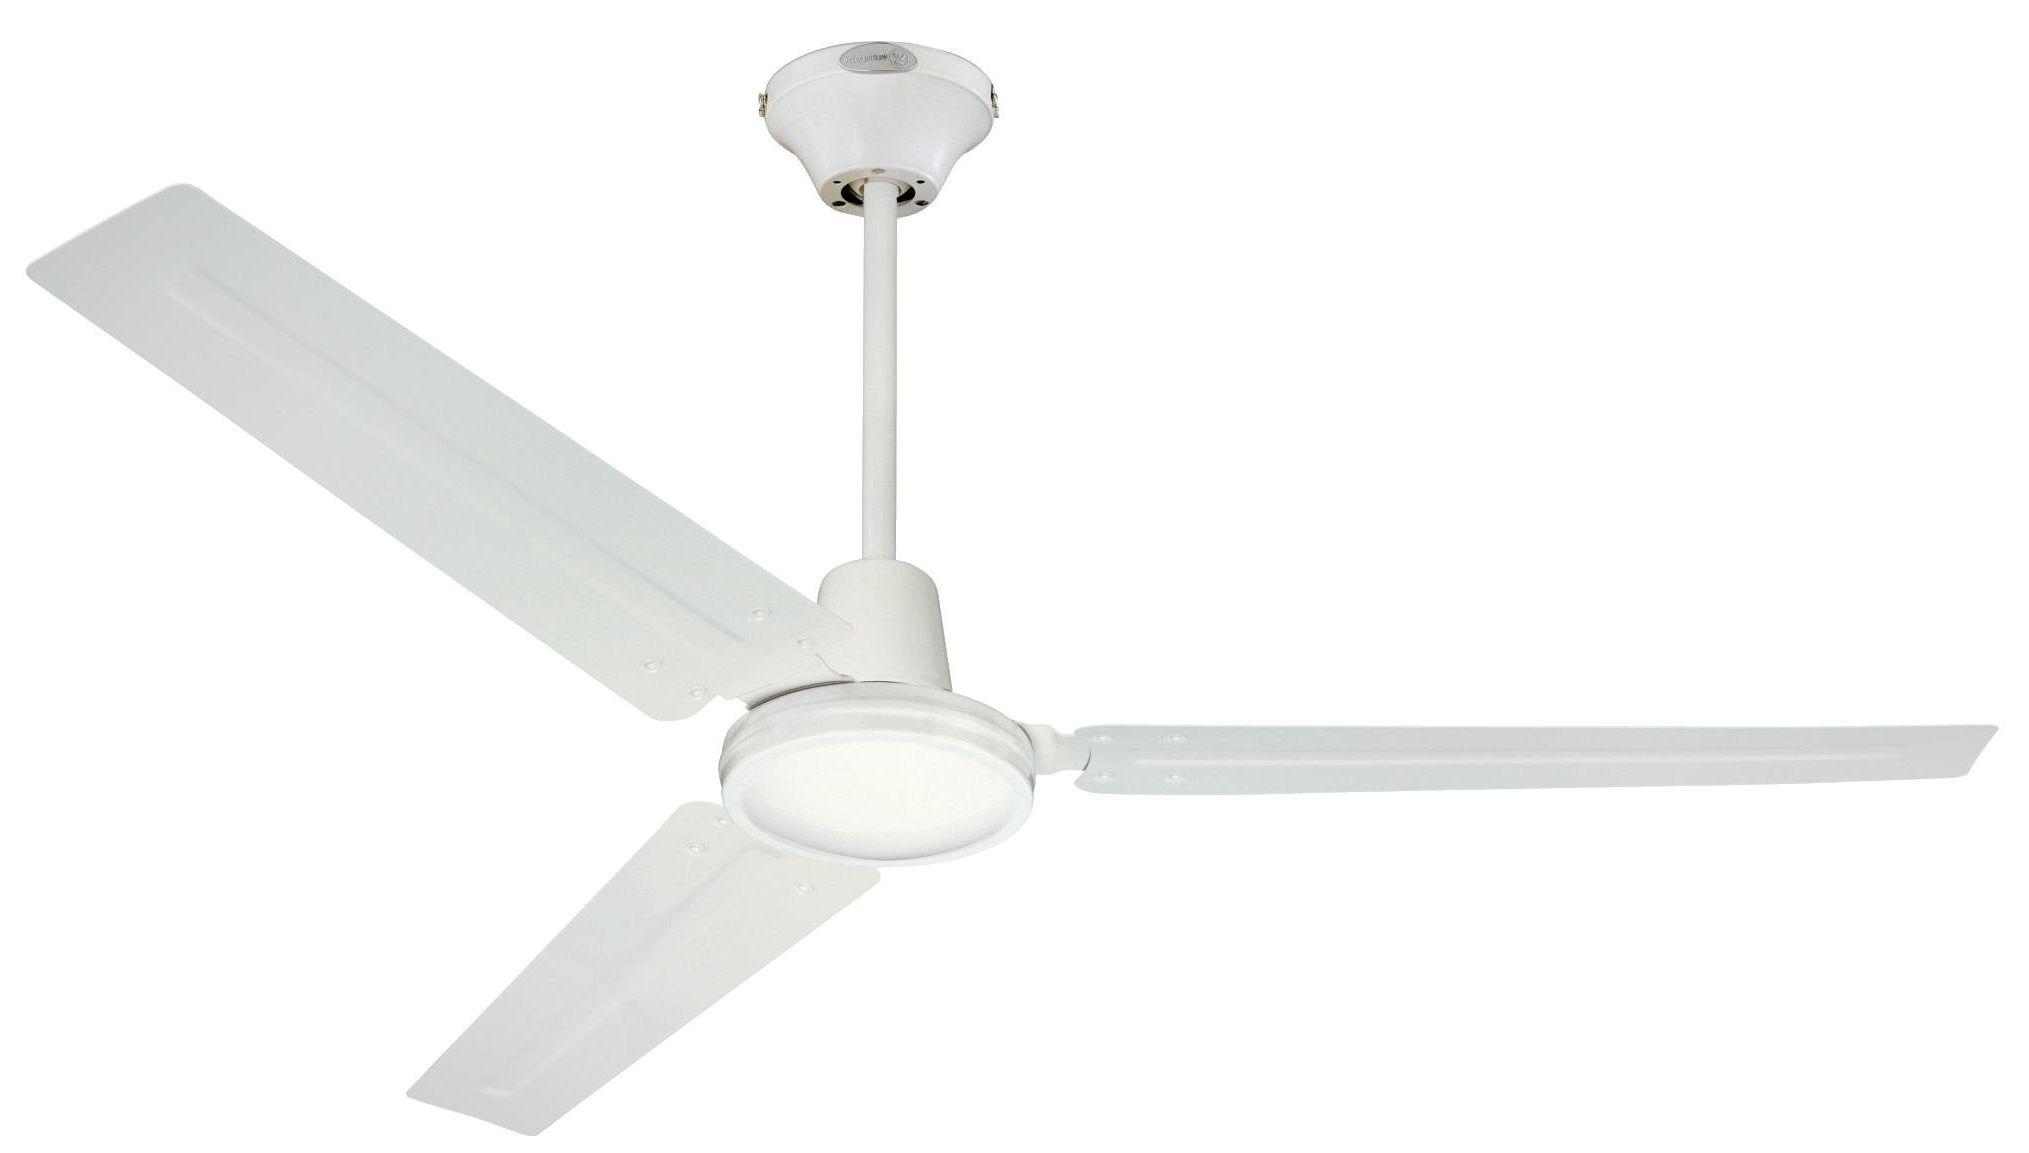 Emil 3 Blade Ceiling Fans Pertaining To 2019 56" Emil 3 Blade Ceiling Fan (View 2 of 20)